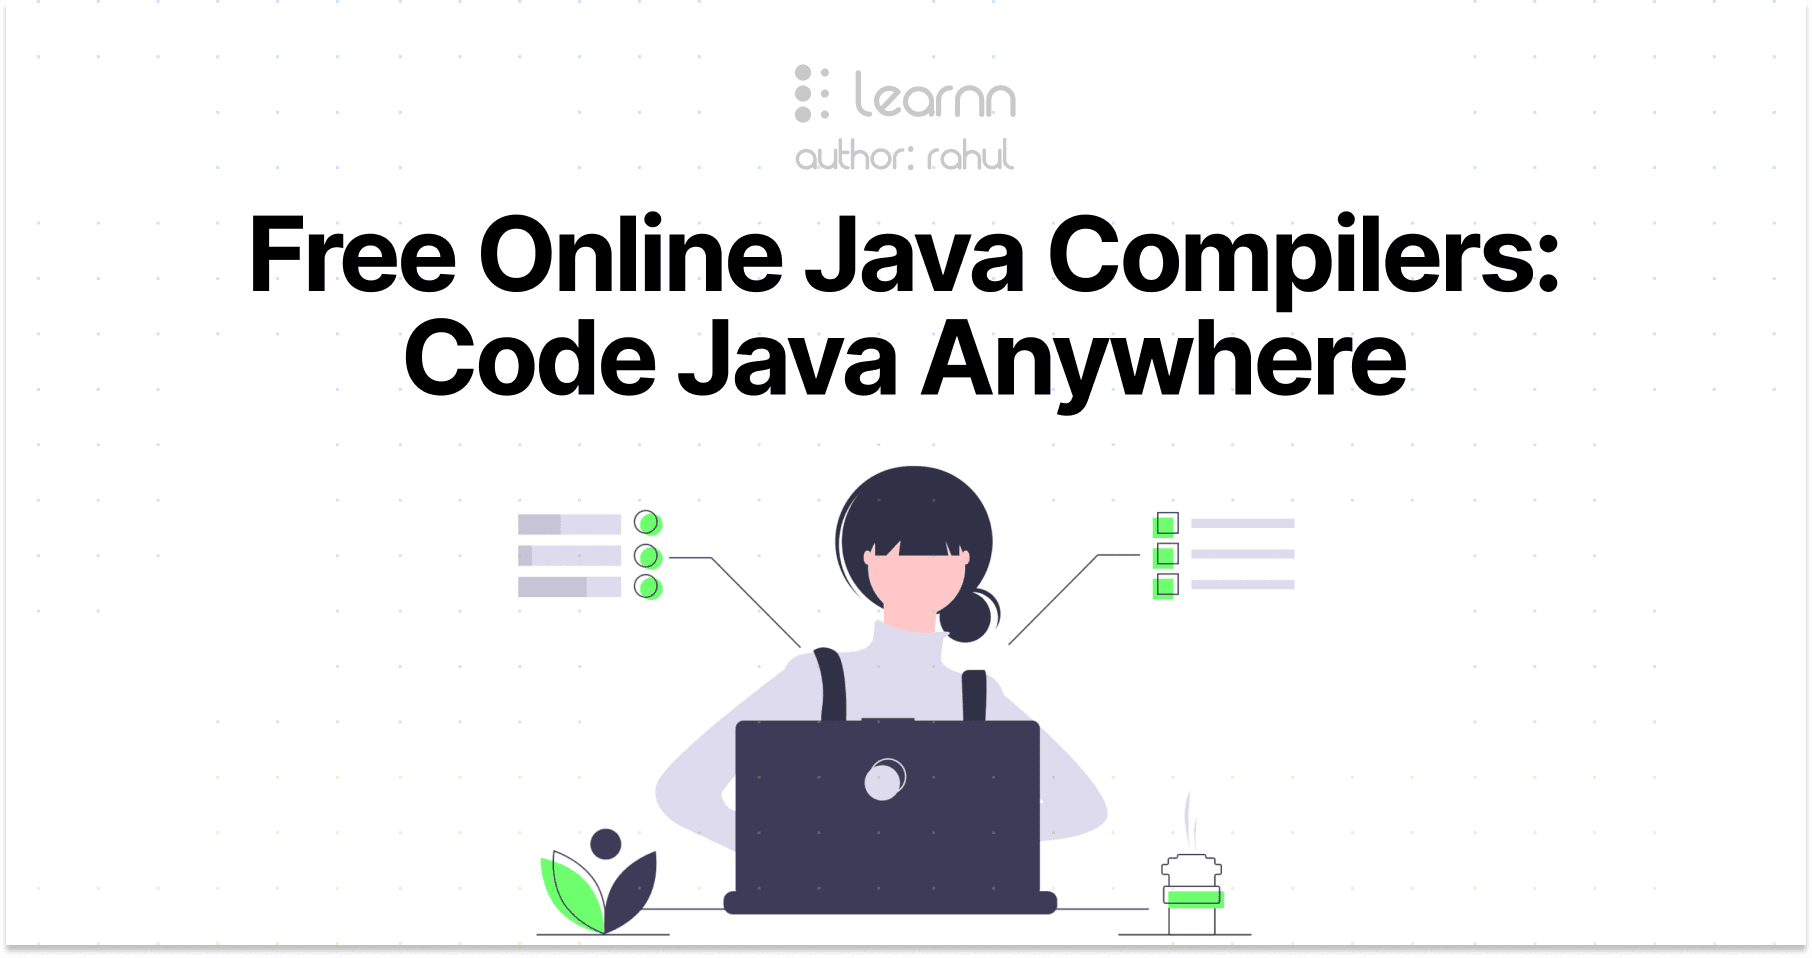 11 Free Online Java Compilers: Code Java Anywhere